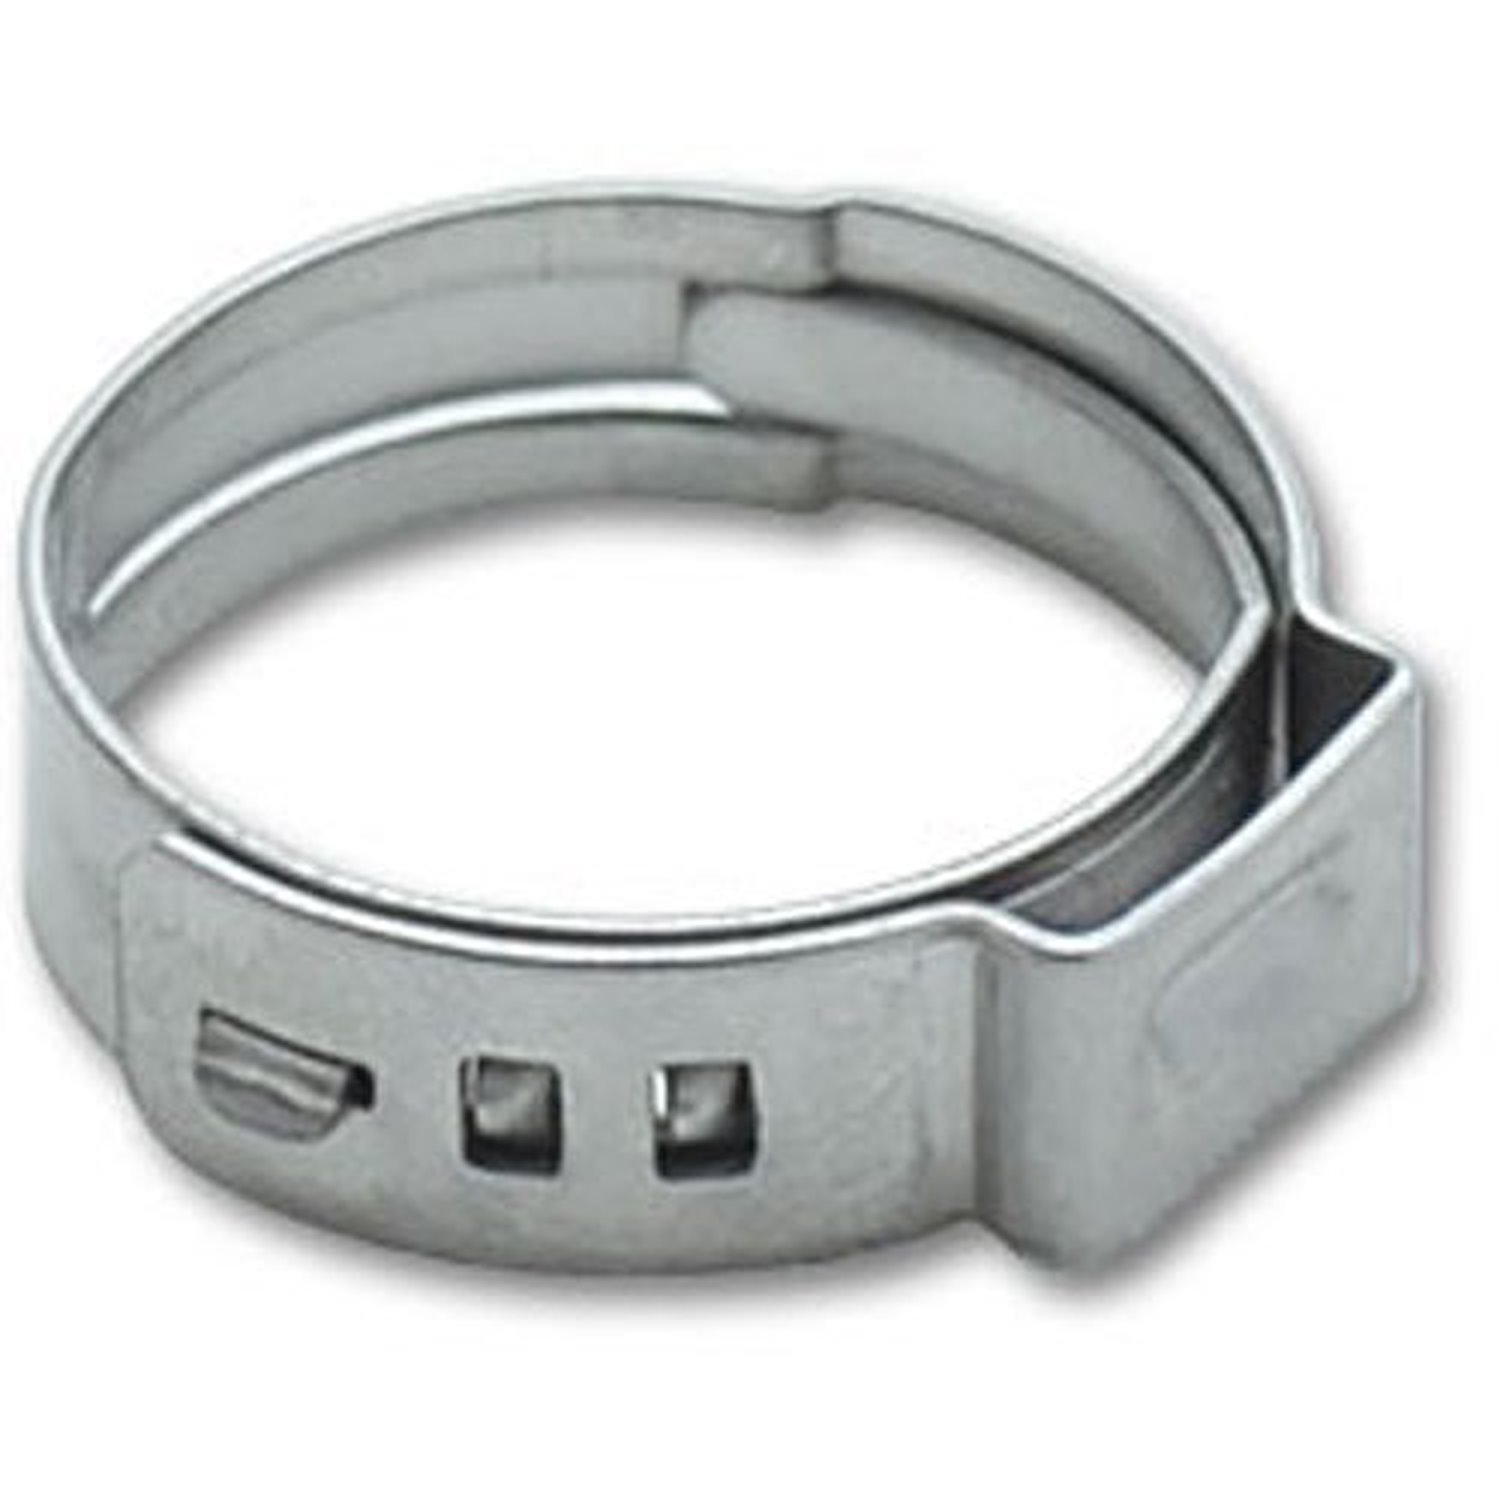 Stainless Steel Pinch Clamps 6.0mm - 7.0mm